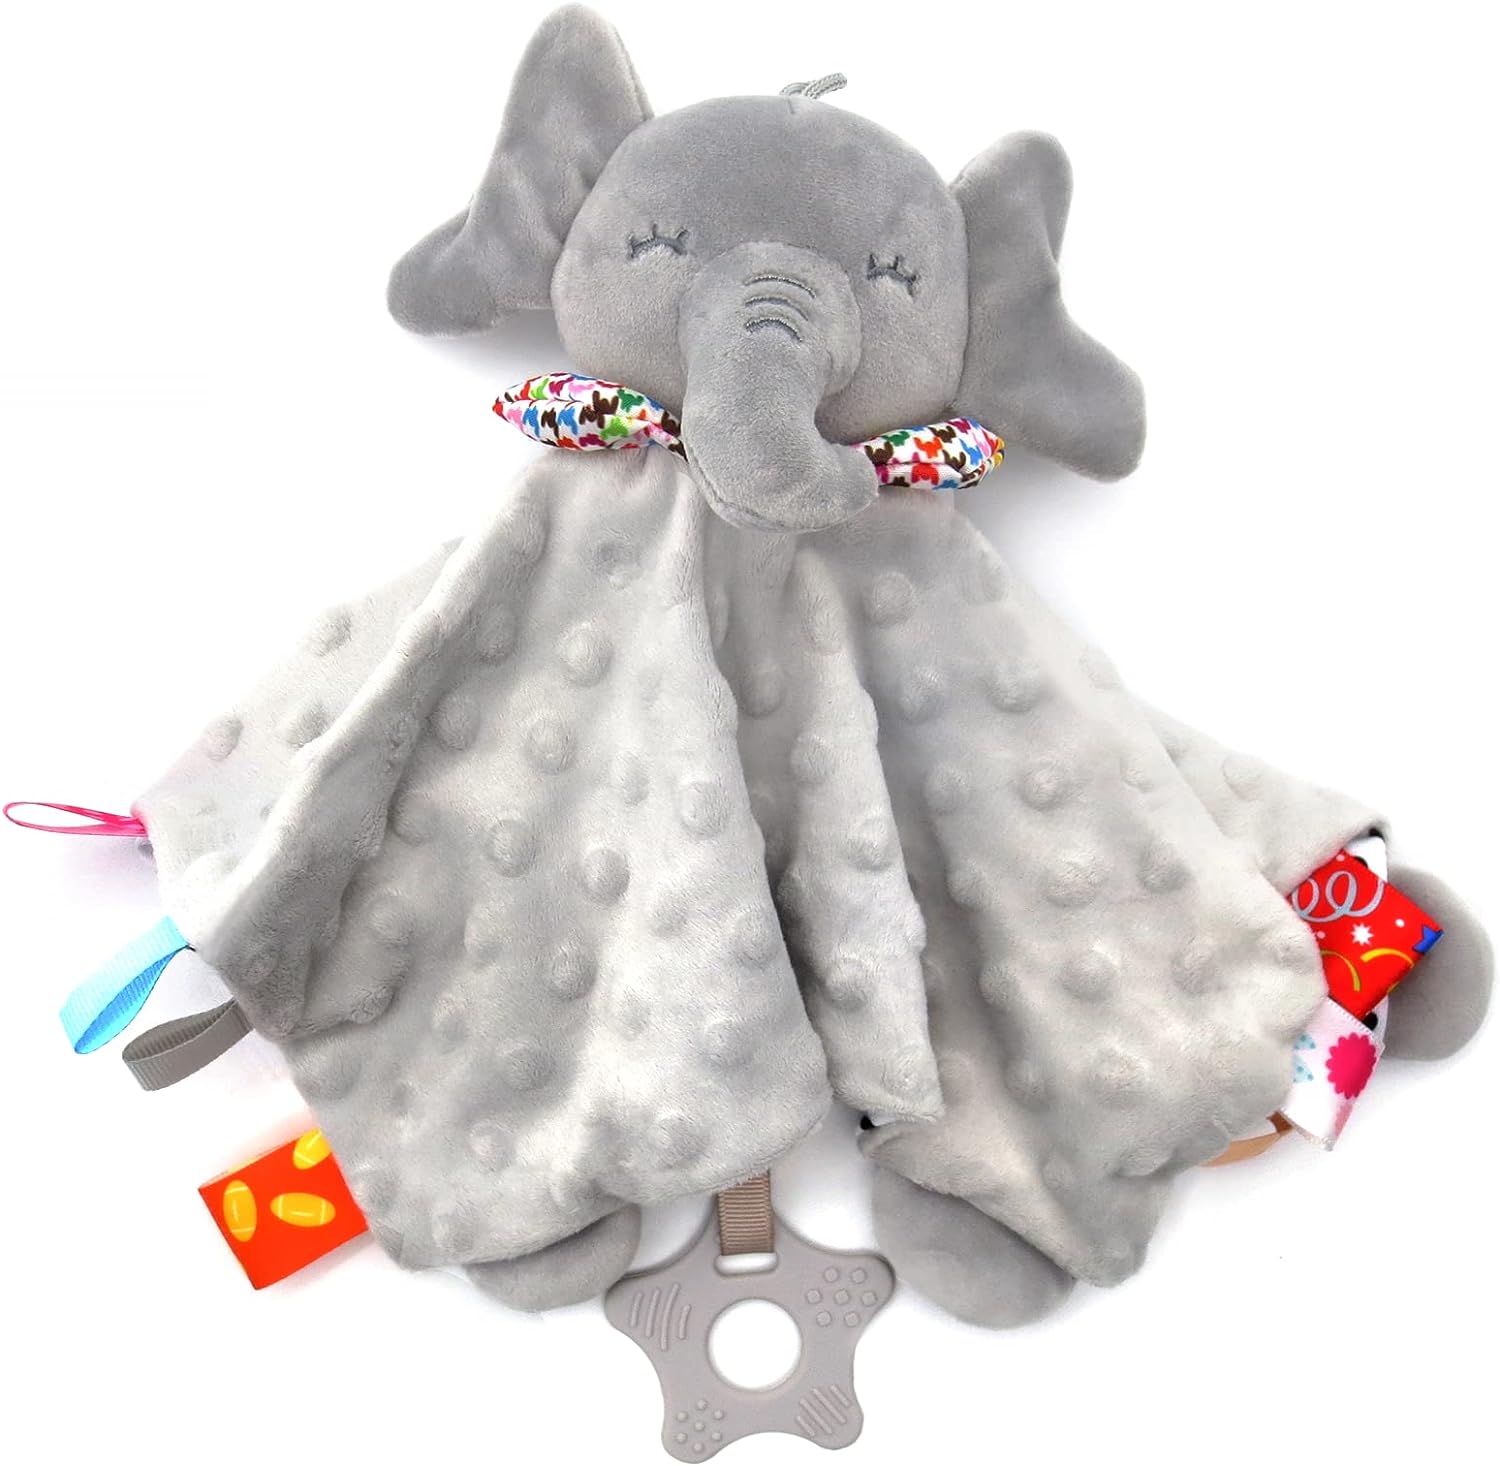 UNMOT Baby Comforters Elephant Blanket | Baby sleeping Security Sensory toy with Teether, Taggies,Soft Plush for 0 3 6 12 month Newborn Girls Boys Gifts